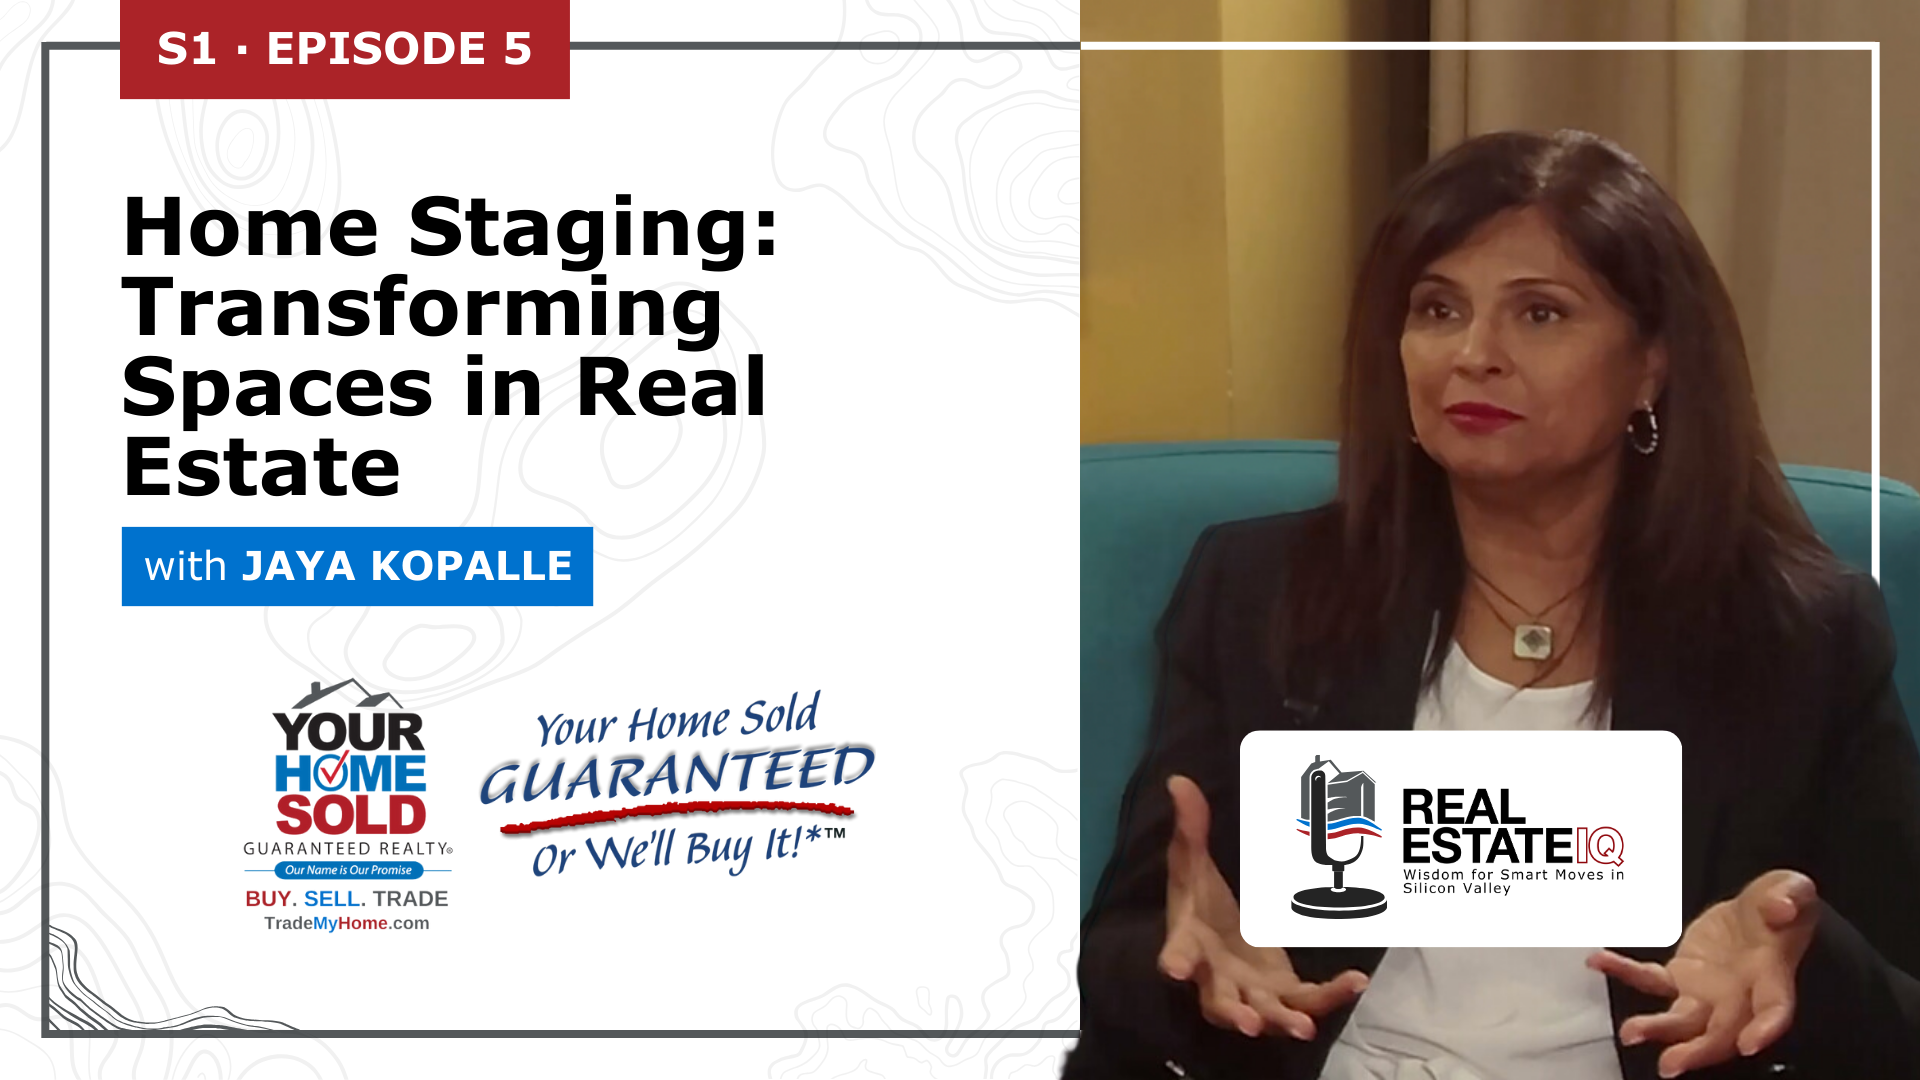 Home Staging: Transforming Spaces in Real Estate Video